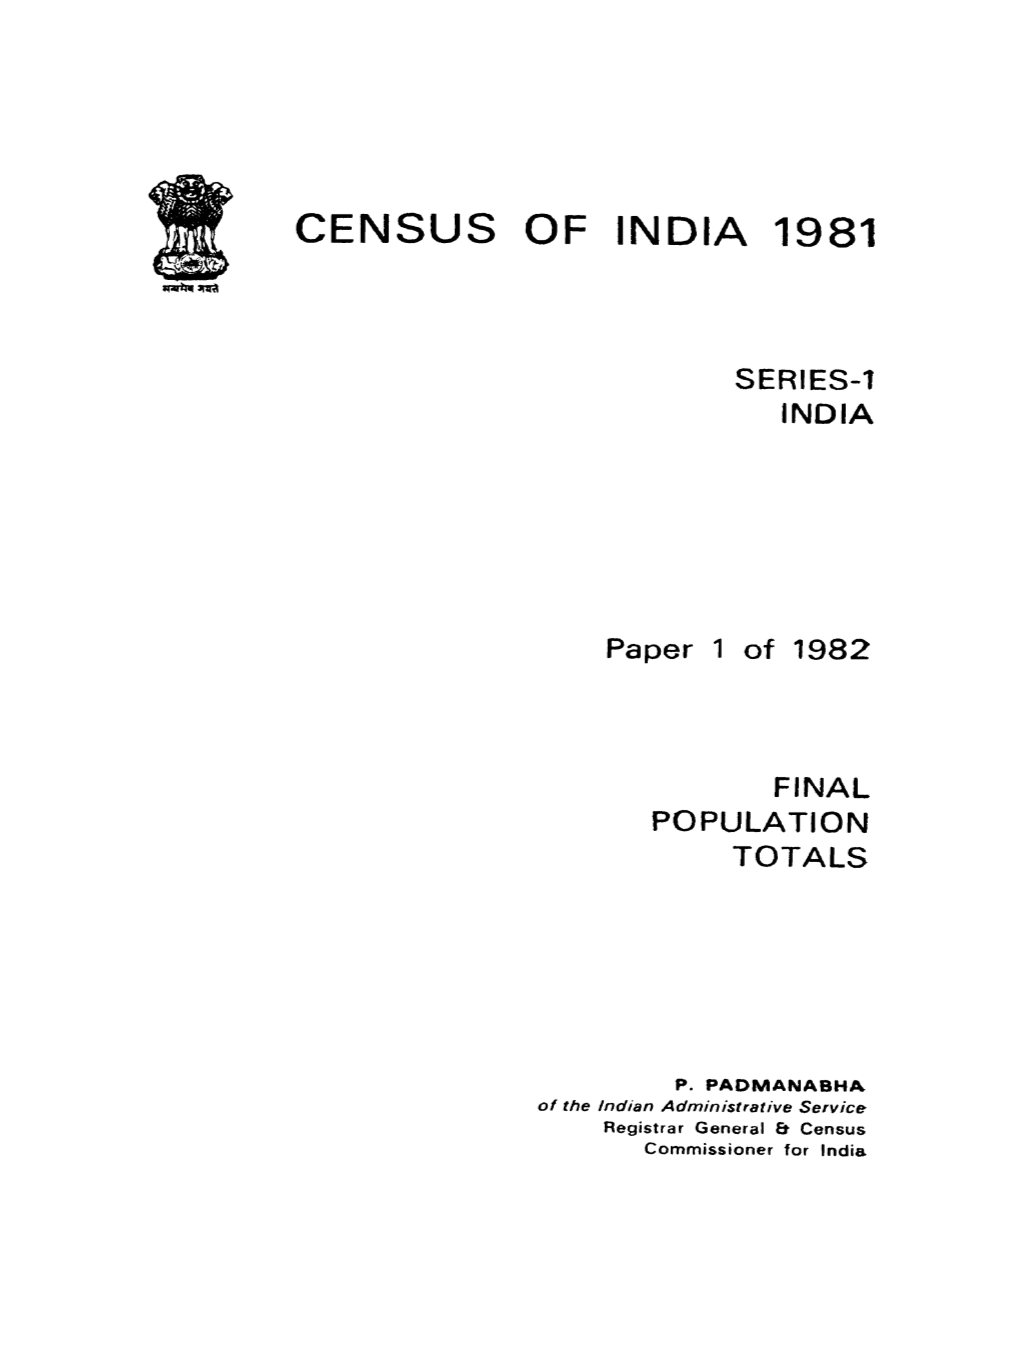 Final Population Totals, Series-1, Paper 1 of 1982, India